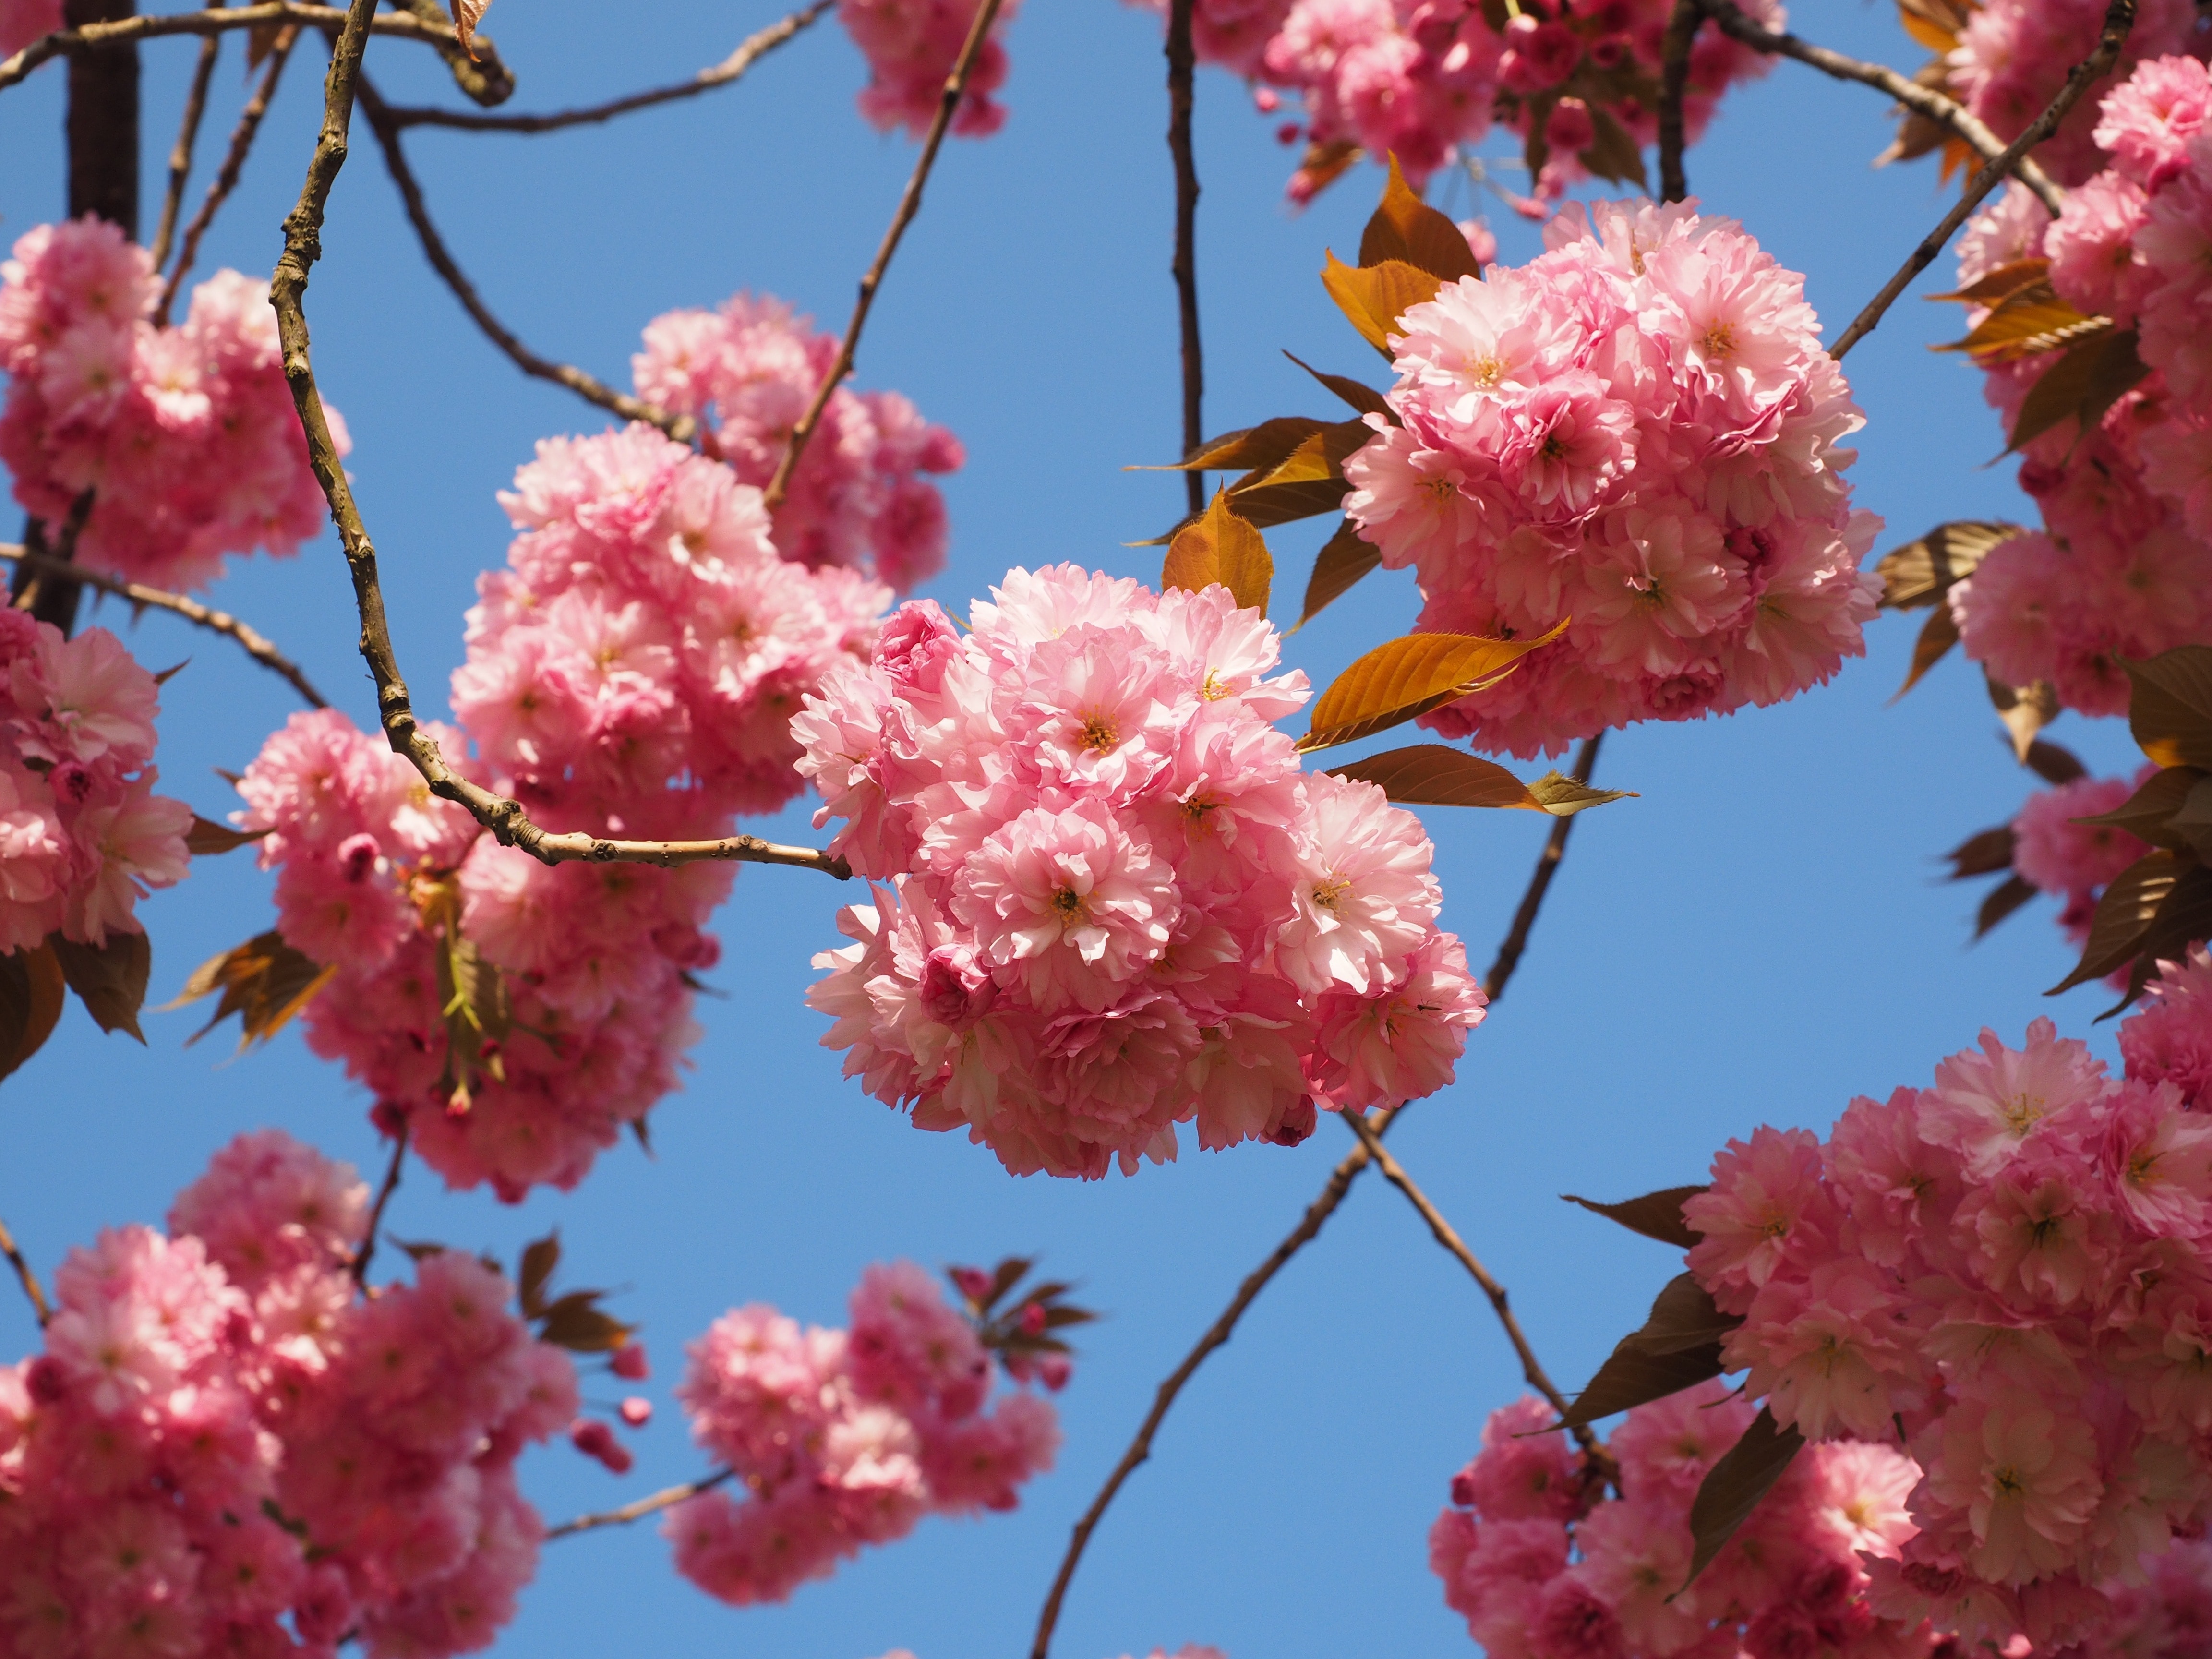 pink petaled cluster flowers blooming during daytime